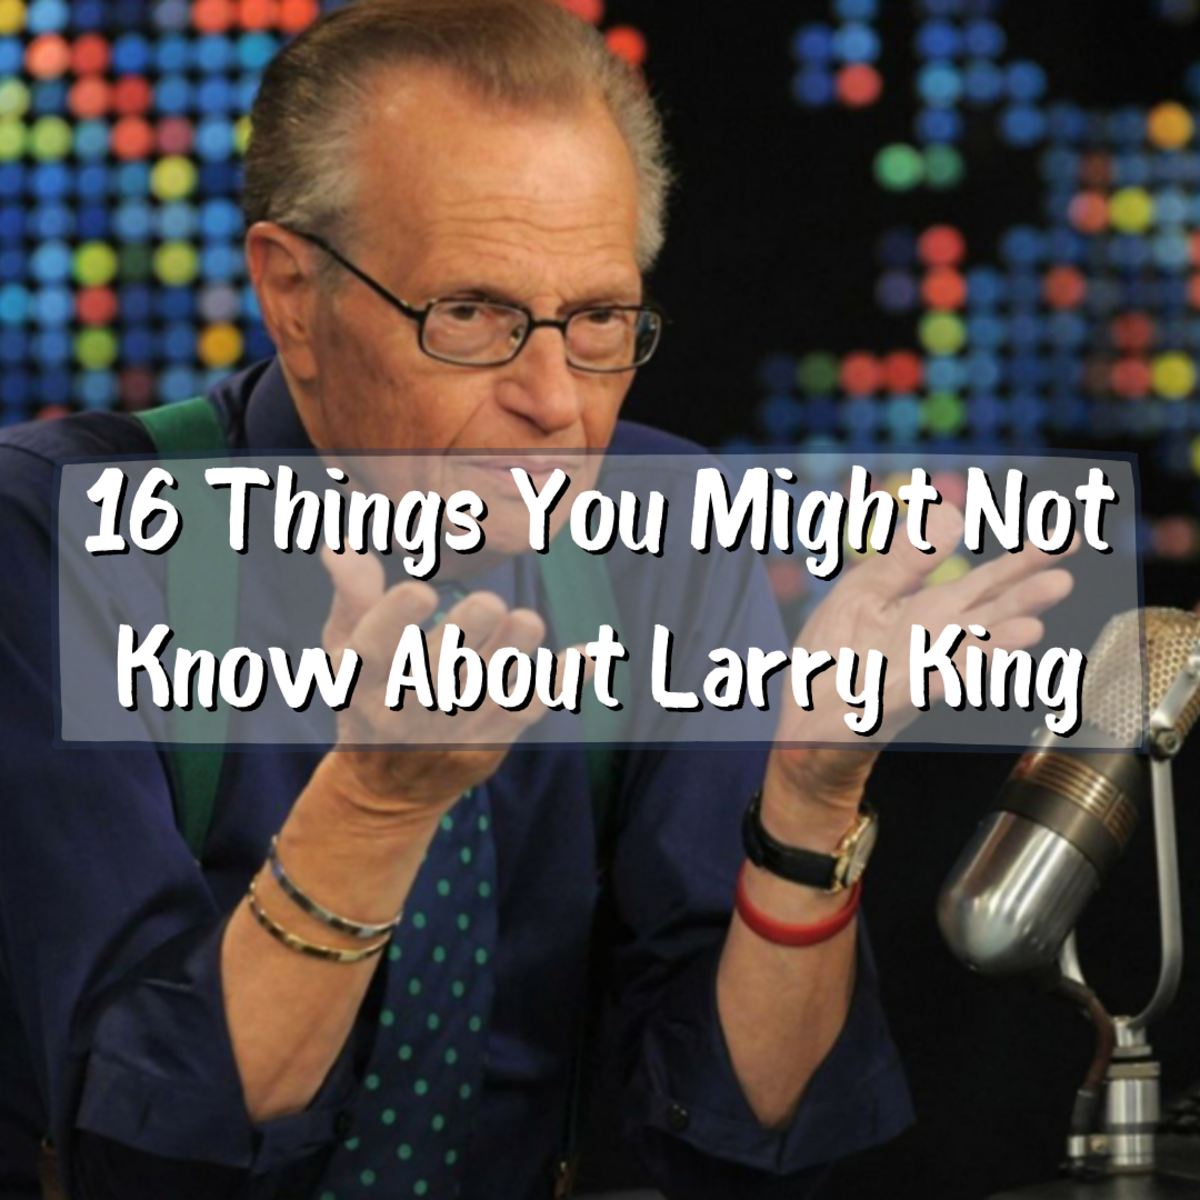 Read on to learn facts and info about Larry King that you might not know. The iconic talk show host had a career spanning 64 years.